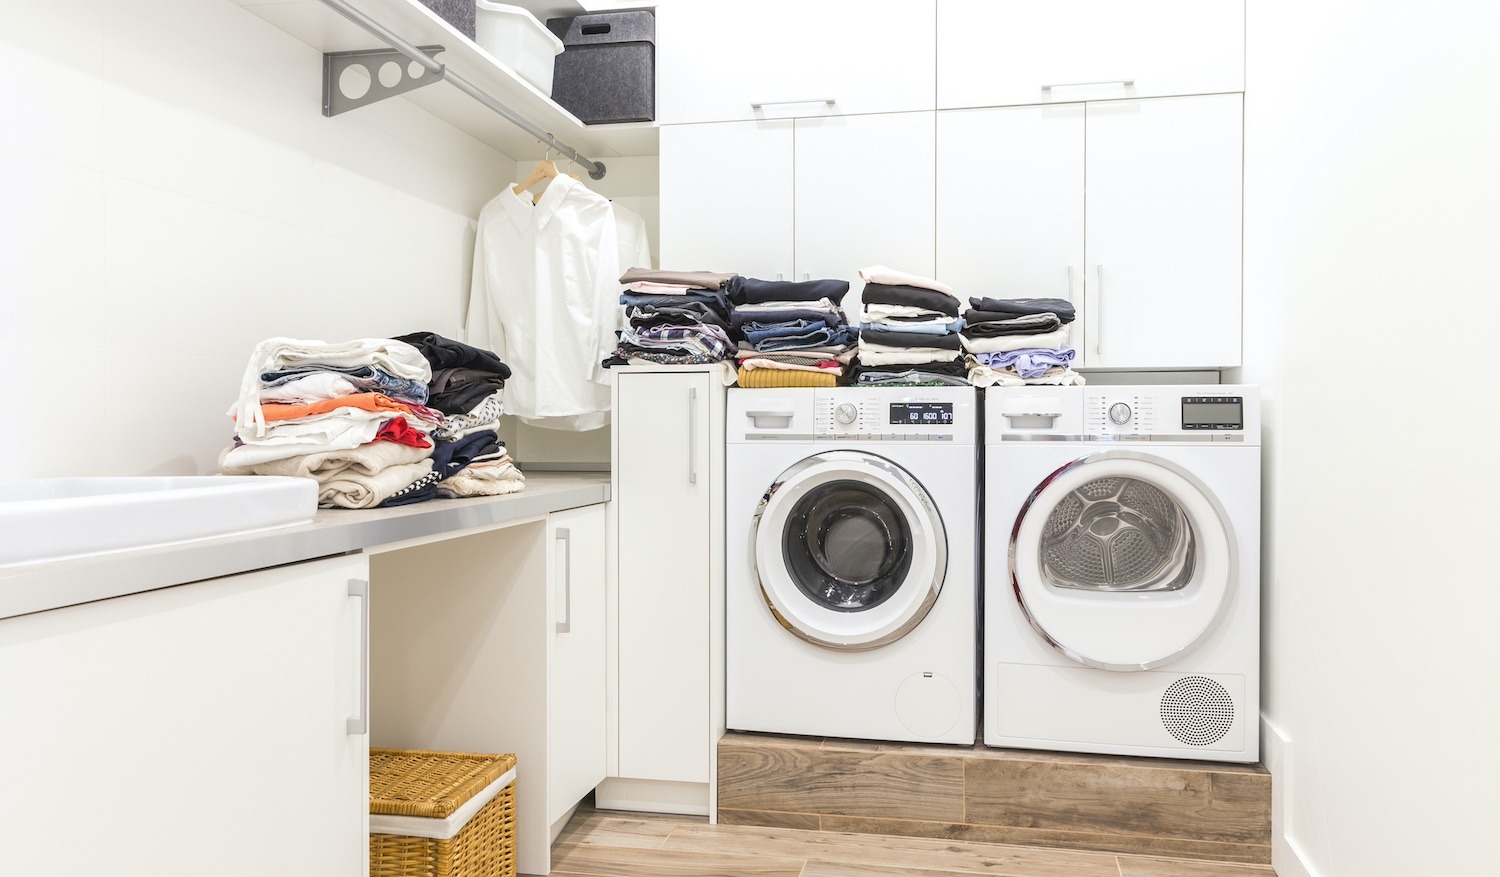 LAUNDRY ROOM - Closets unlimited